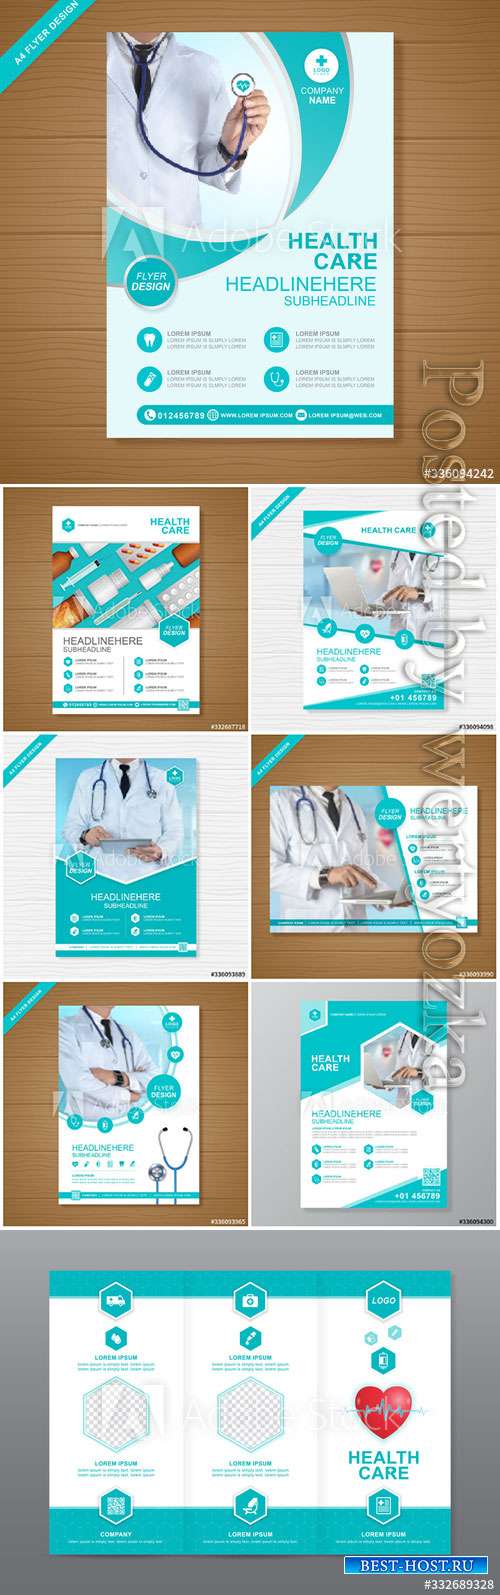 Health care cover a4 template design for a report and medical brochure